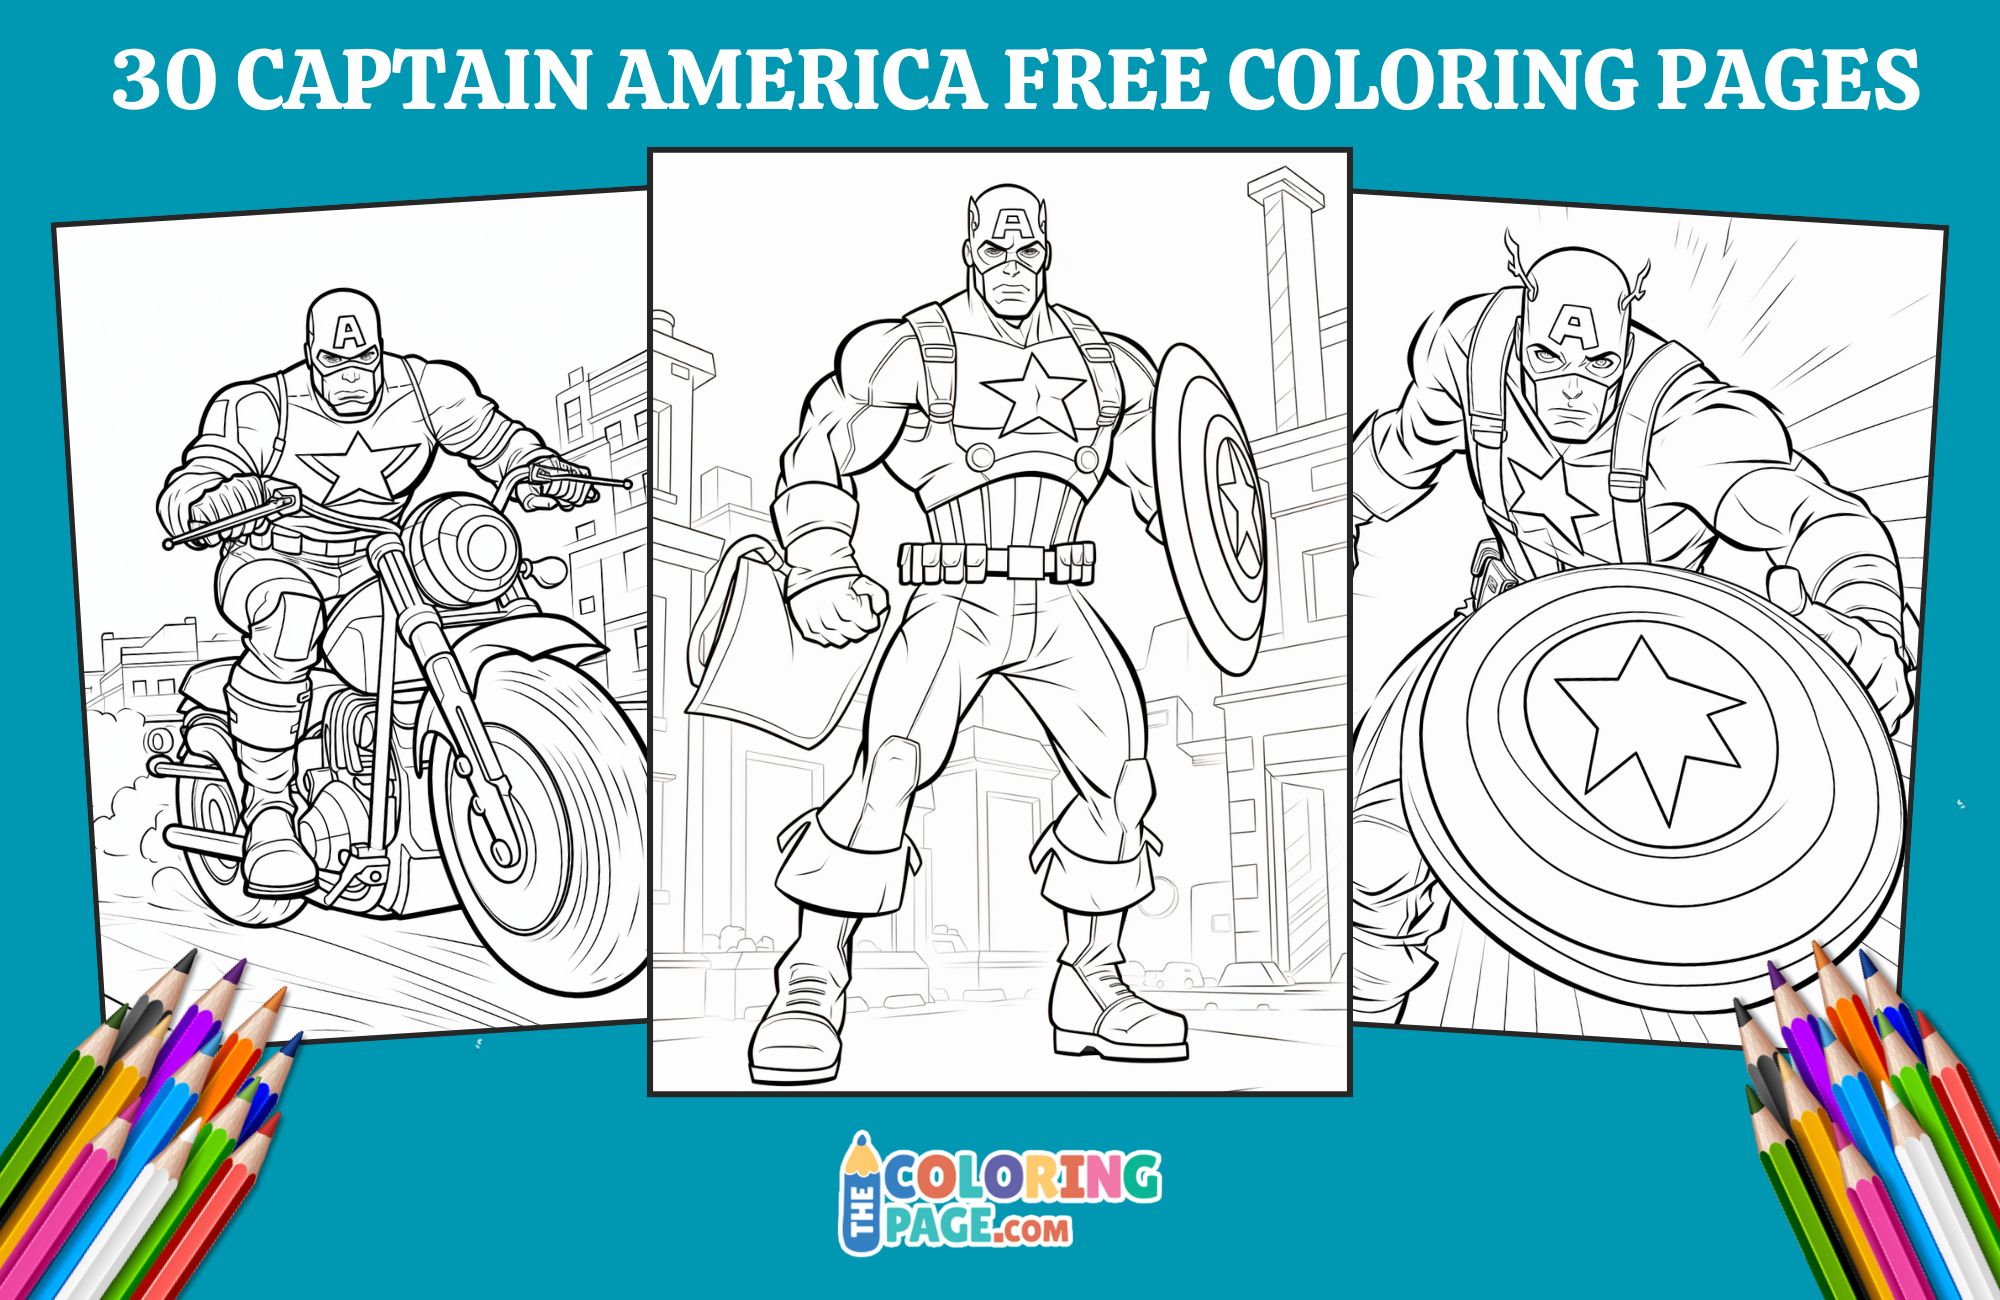 30 Free Captain America Coloring Pages for kids